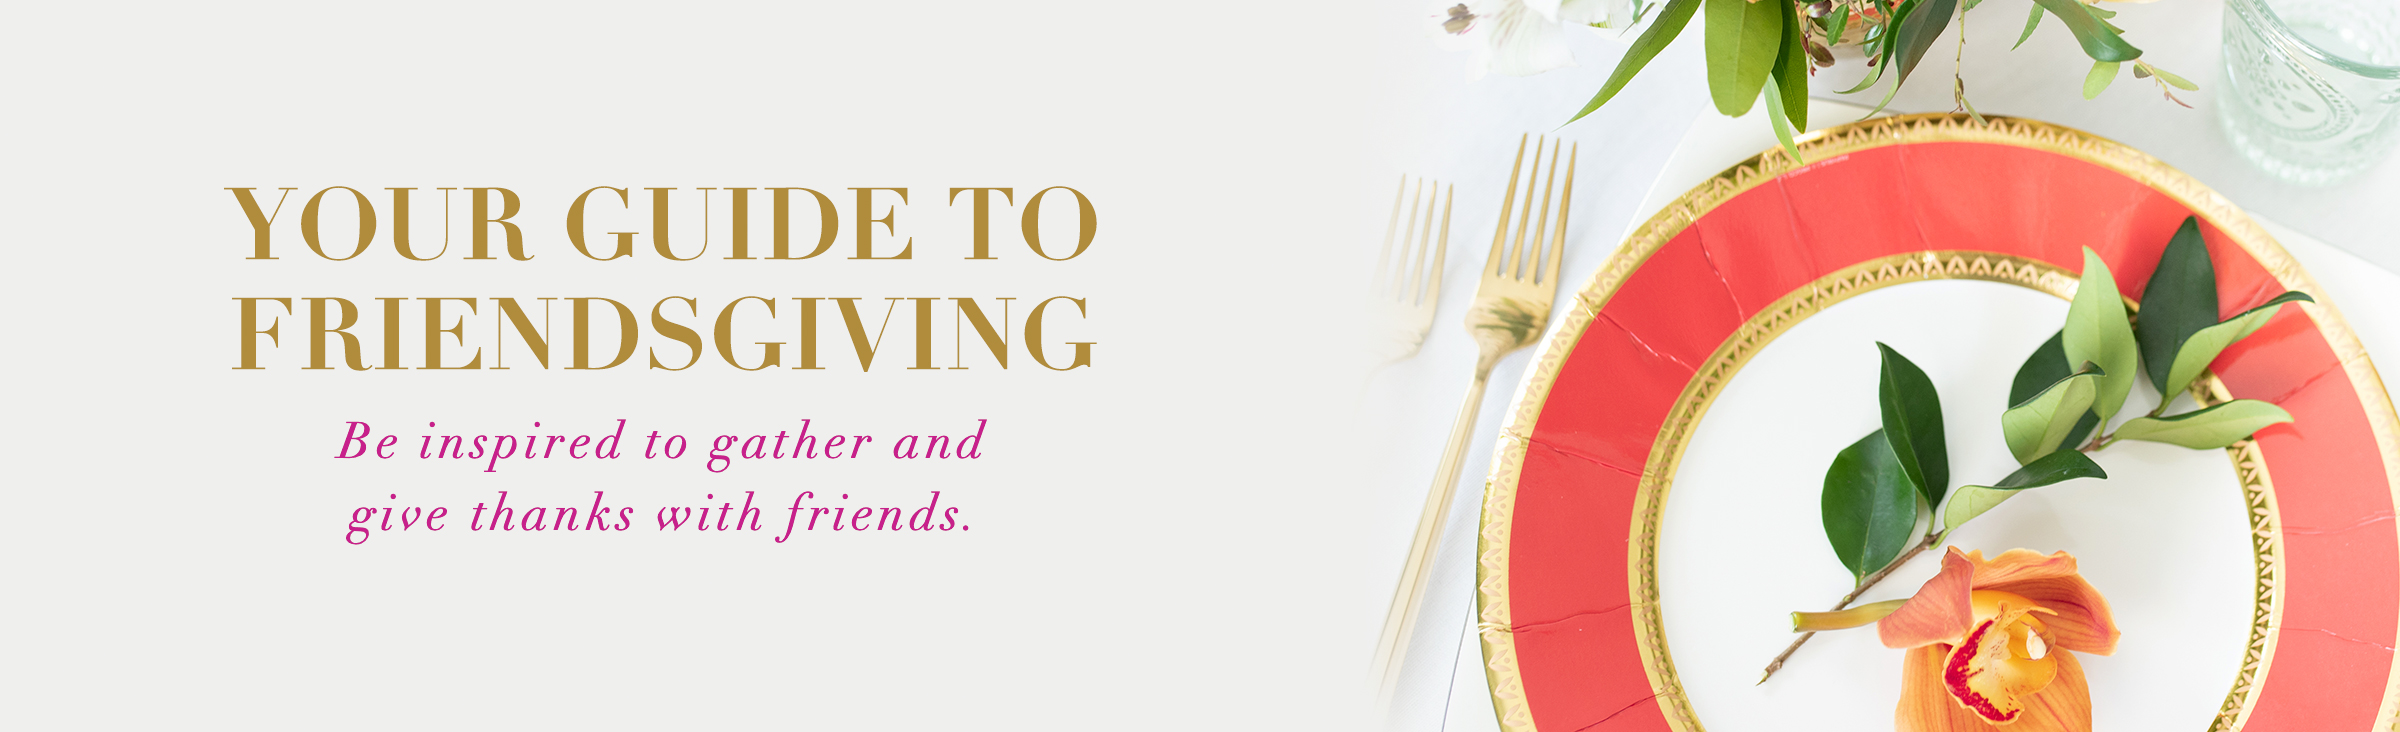 Your Guide to Friendsgiving Be inspired to gather and give thanks with friends